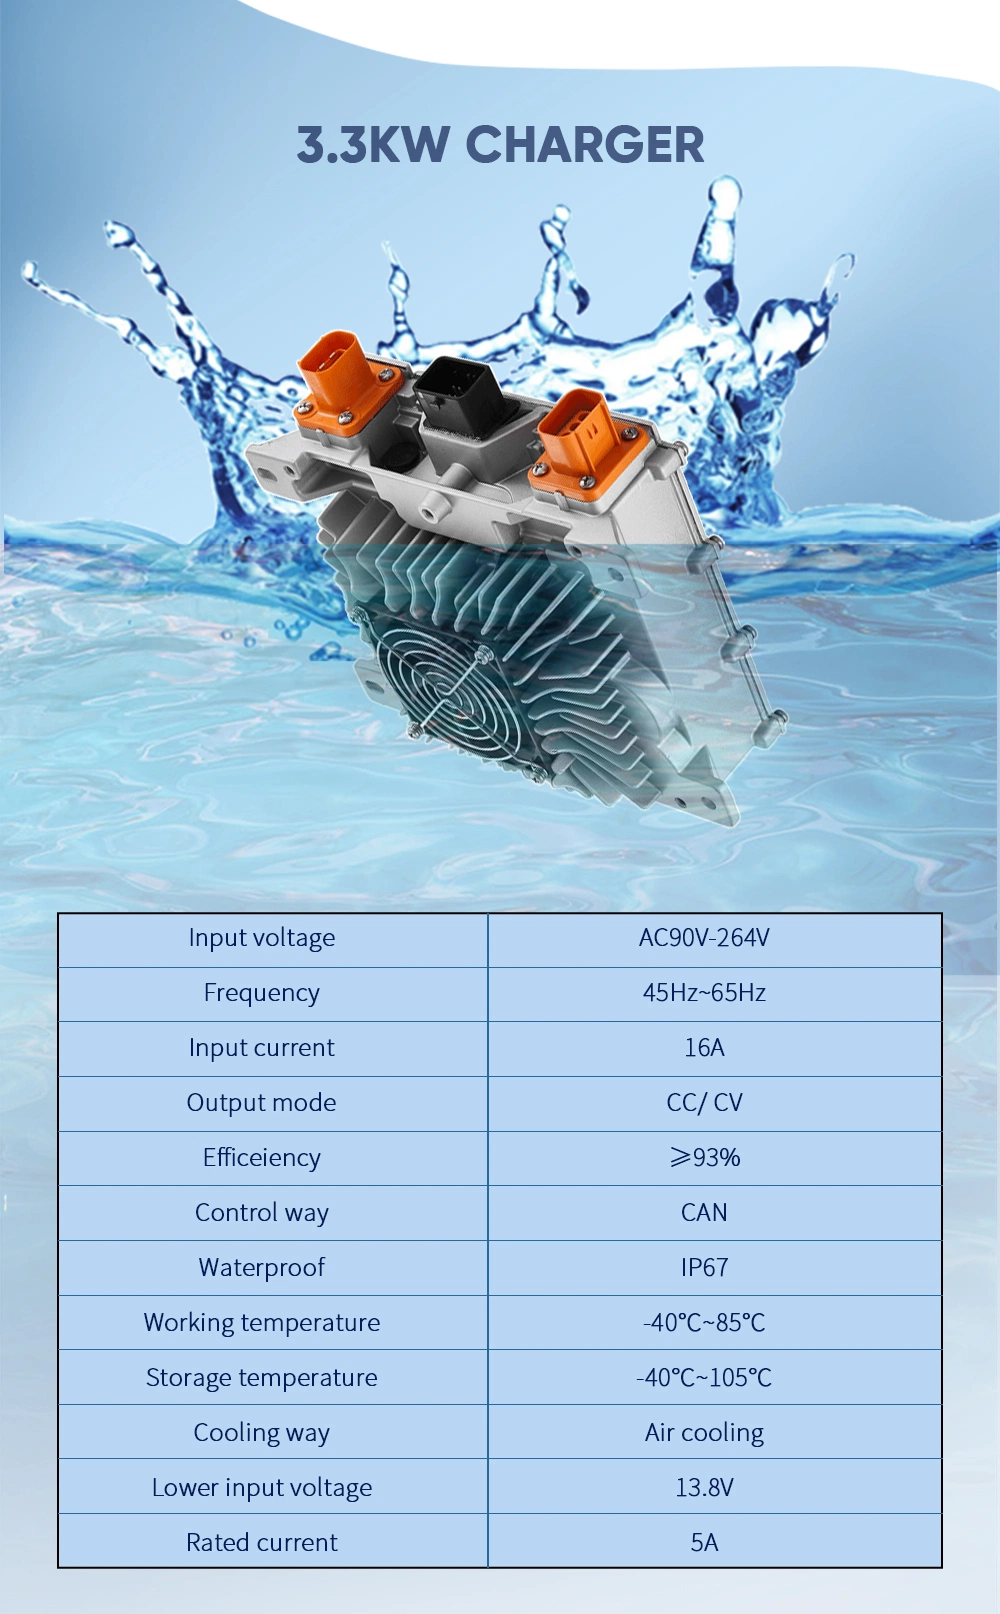 3.3kw 144V 23A Vehicle-Mounted Battery Charger, Marine Waterproof Charging Machine, EV Charger, OEM